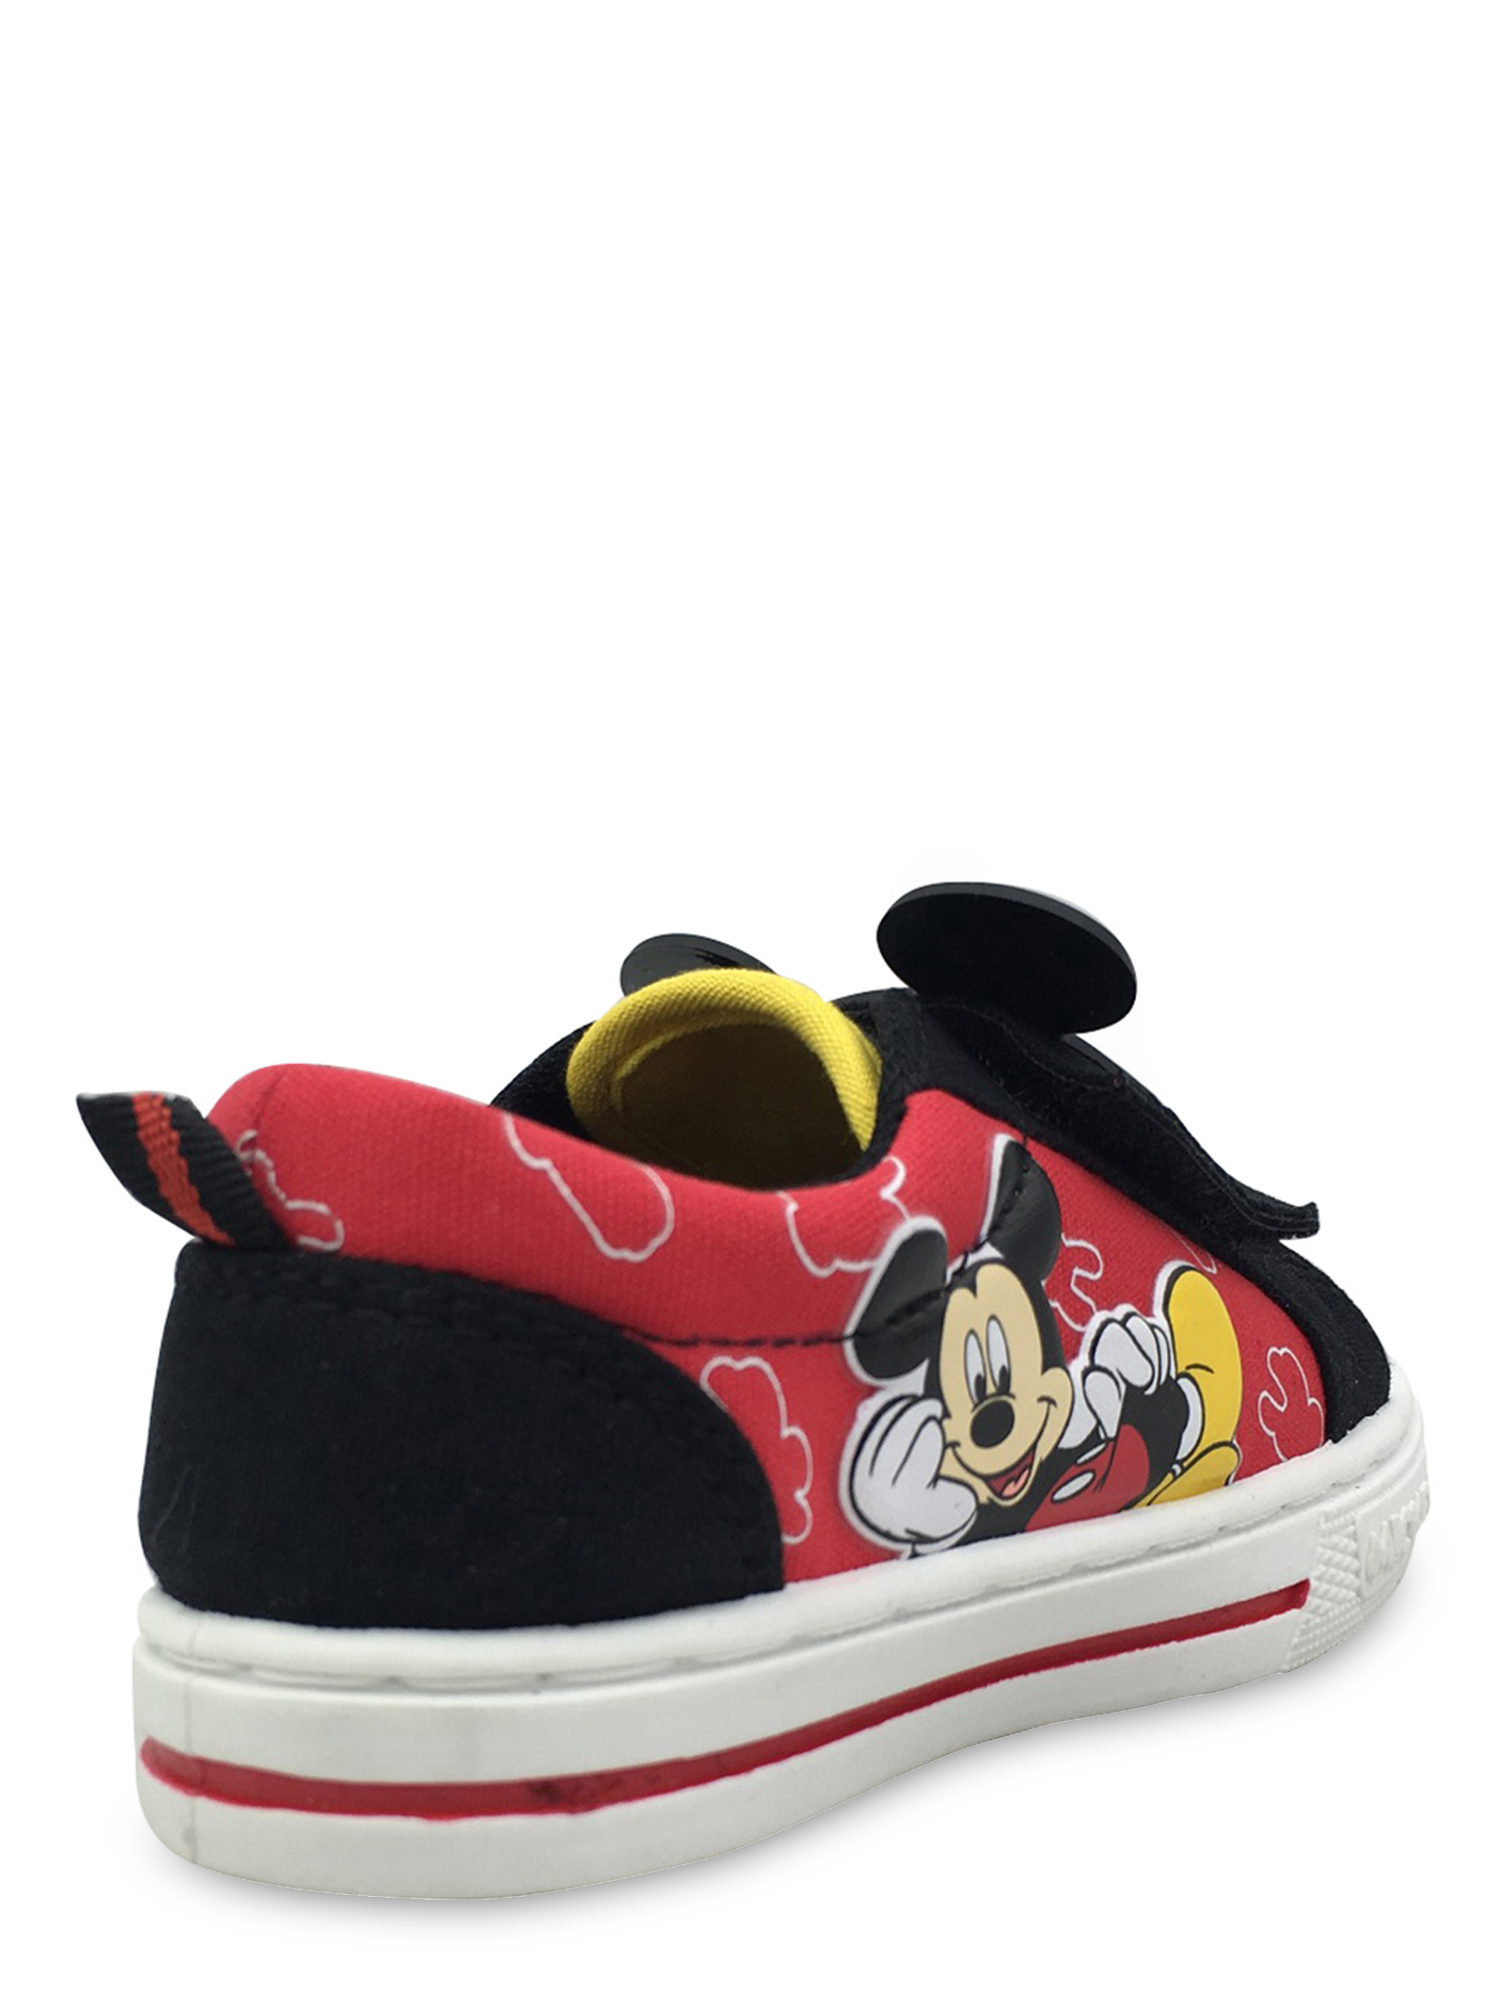 Mickey Mouse Cap Toe Casual Sneaker (Toddler Boys) - image 4 of 8